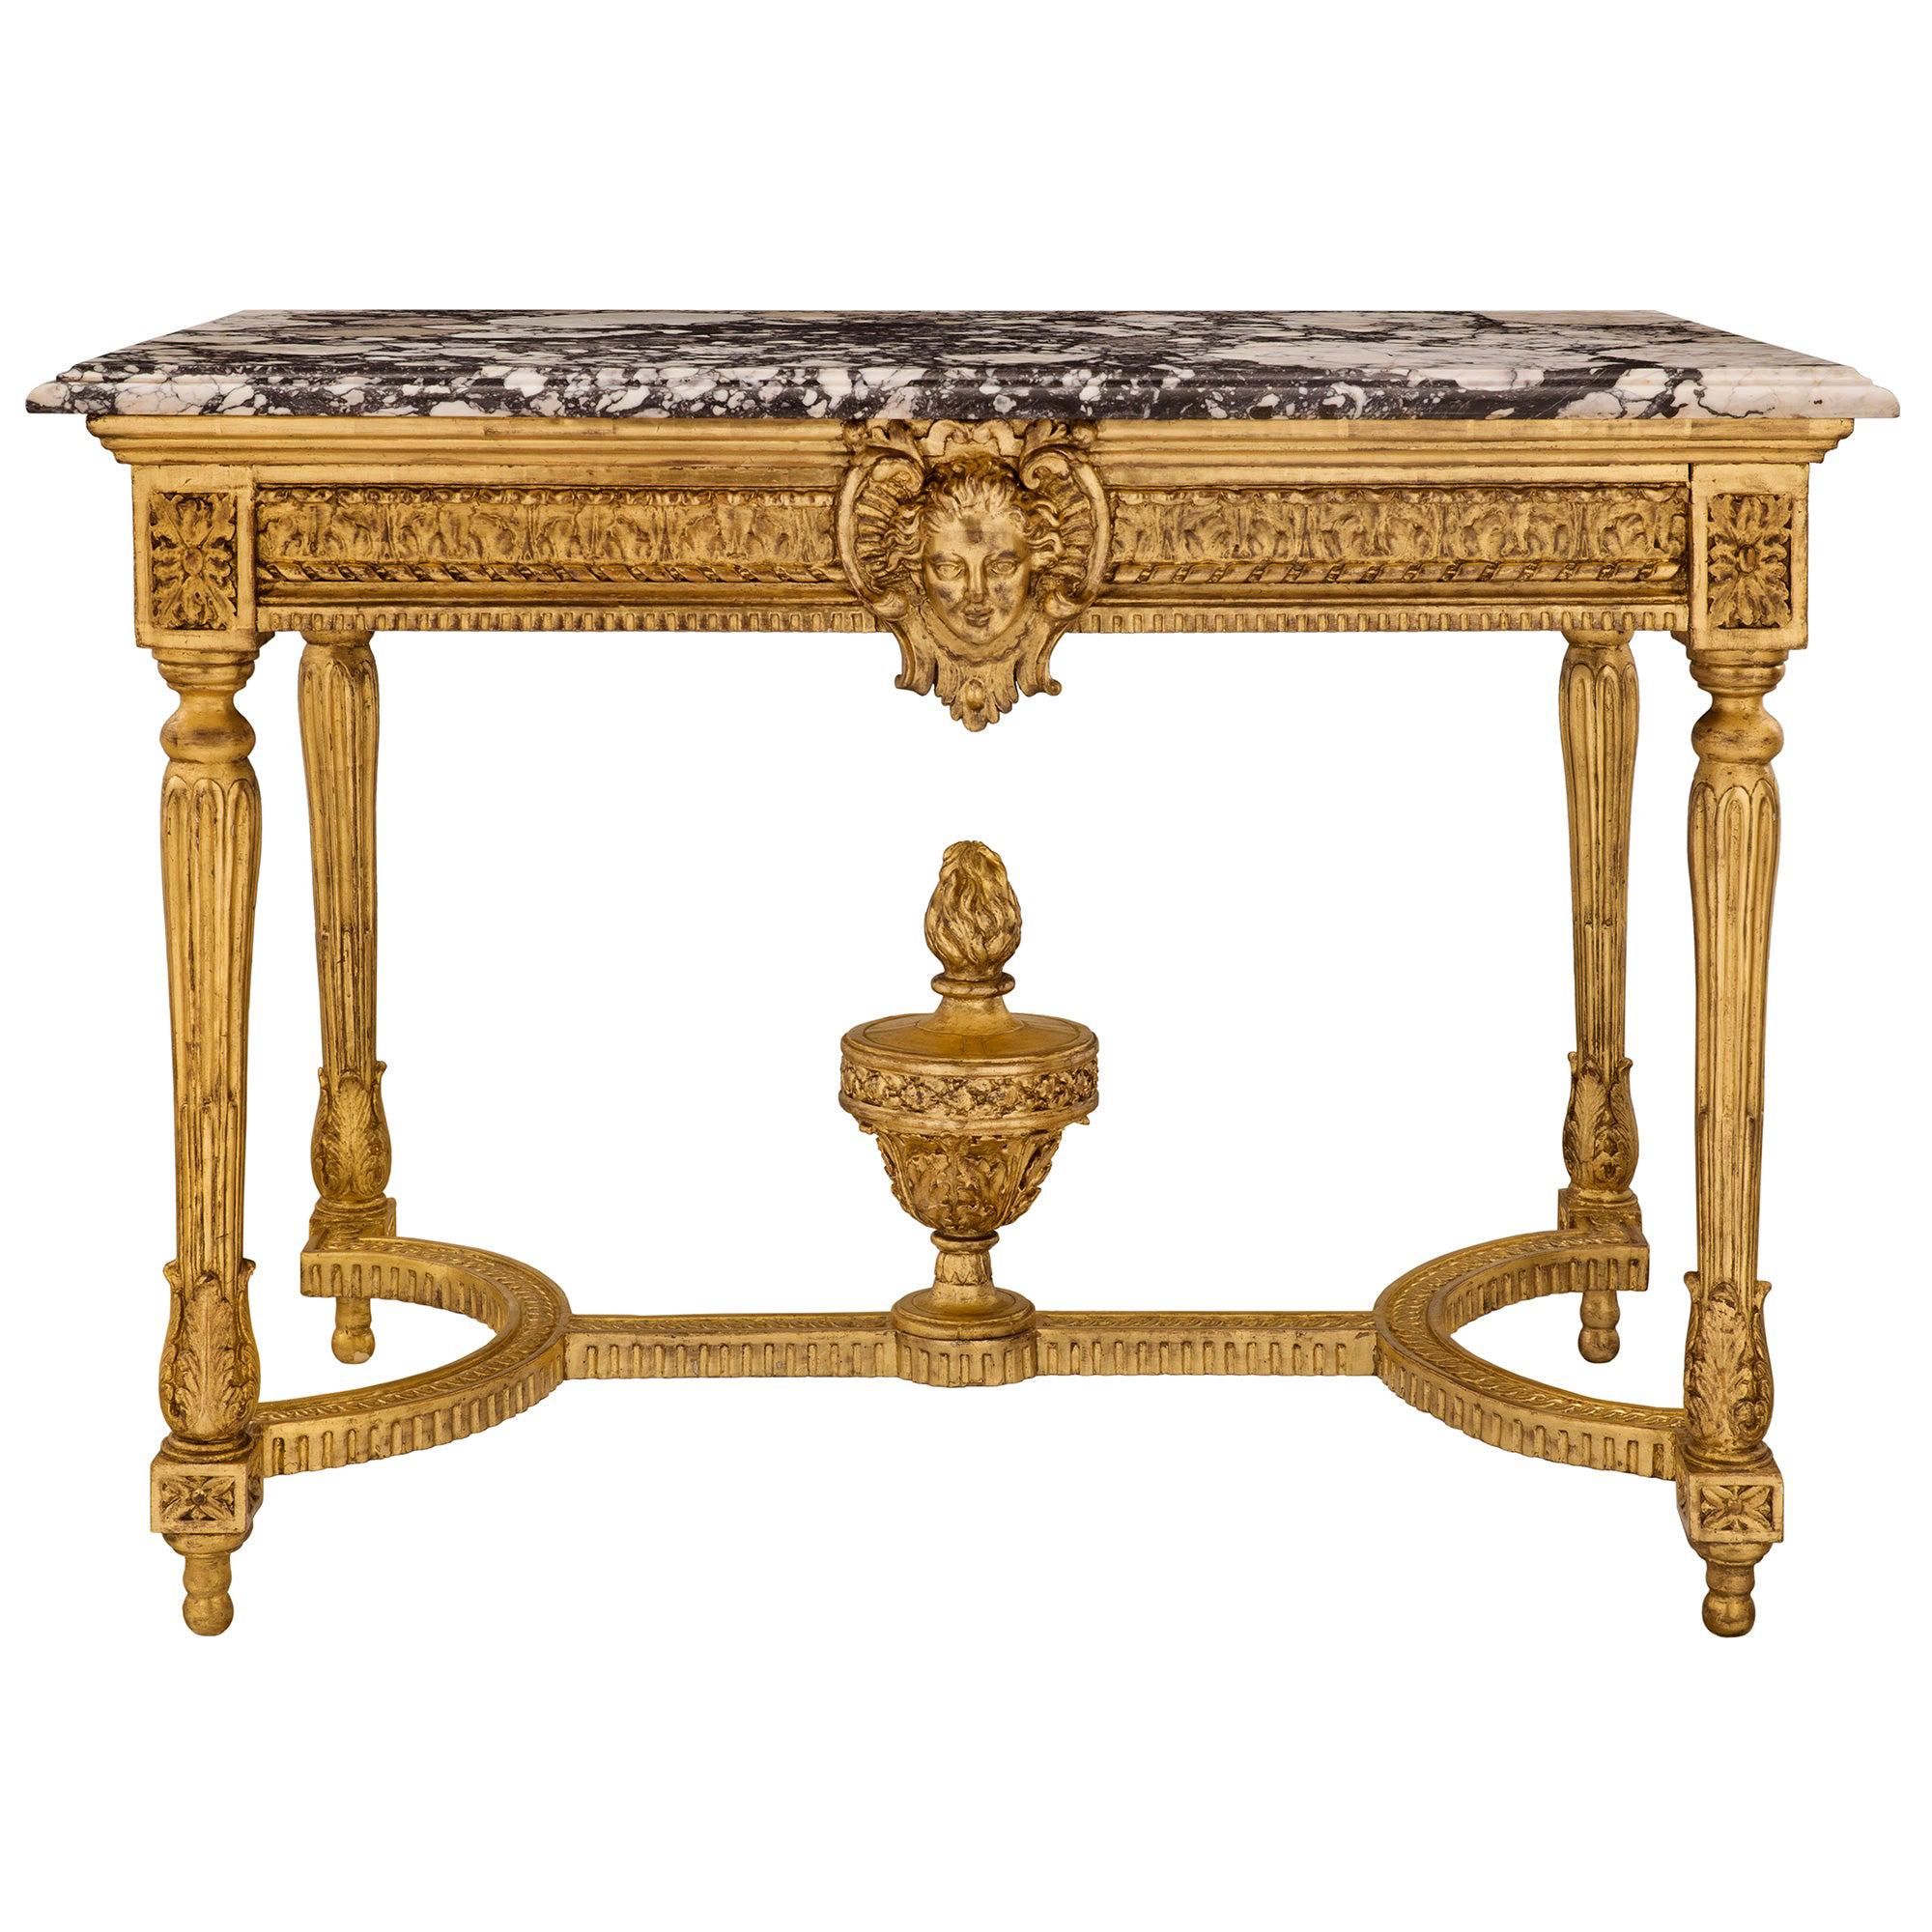 French Mid-19th Century Louis XVI Style Giltwood Center Table For Sale